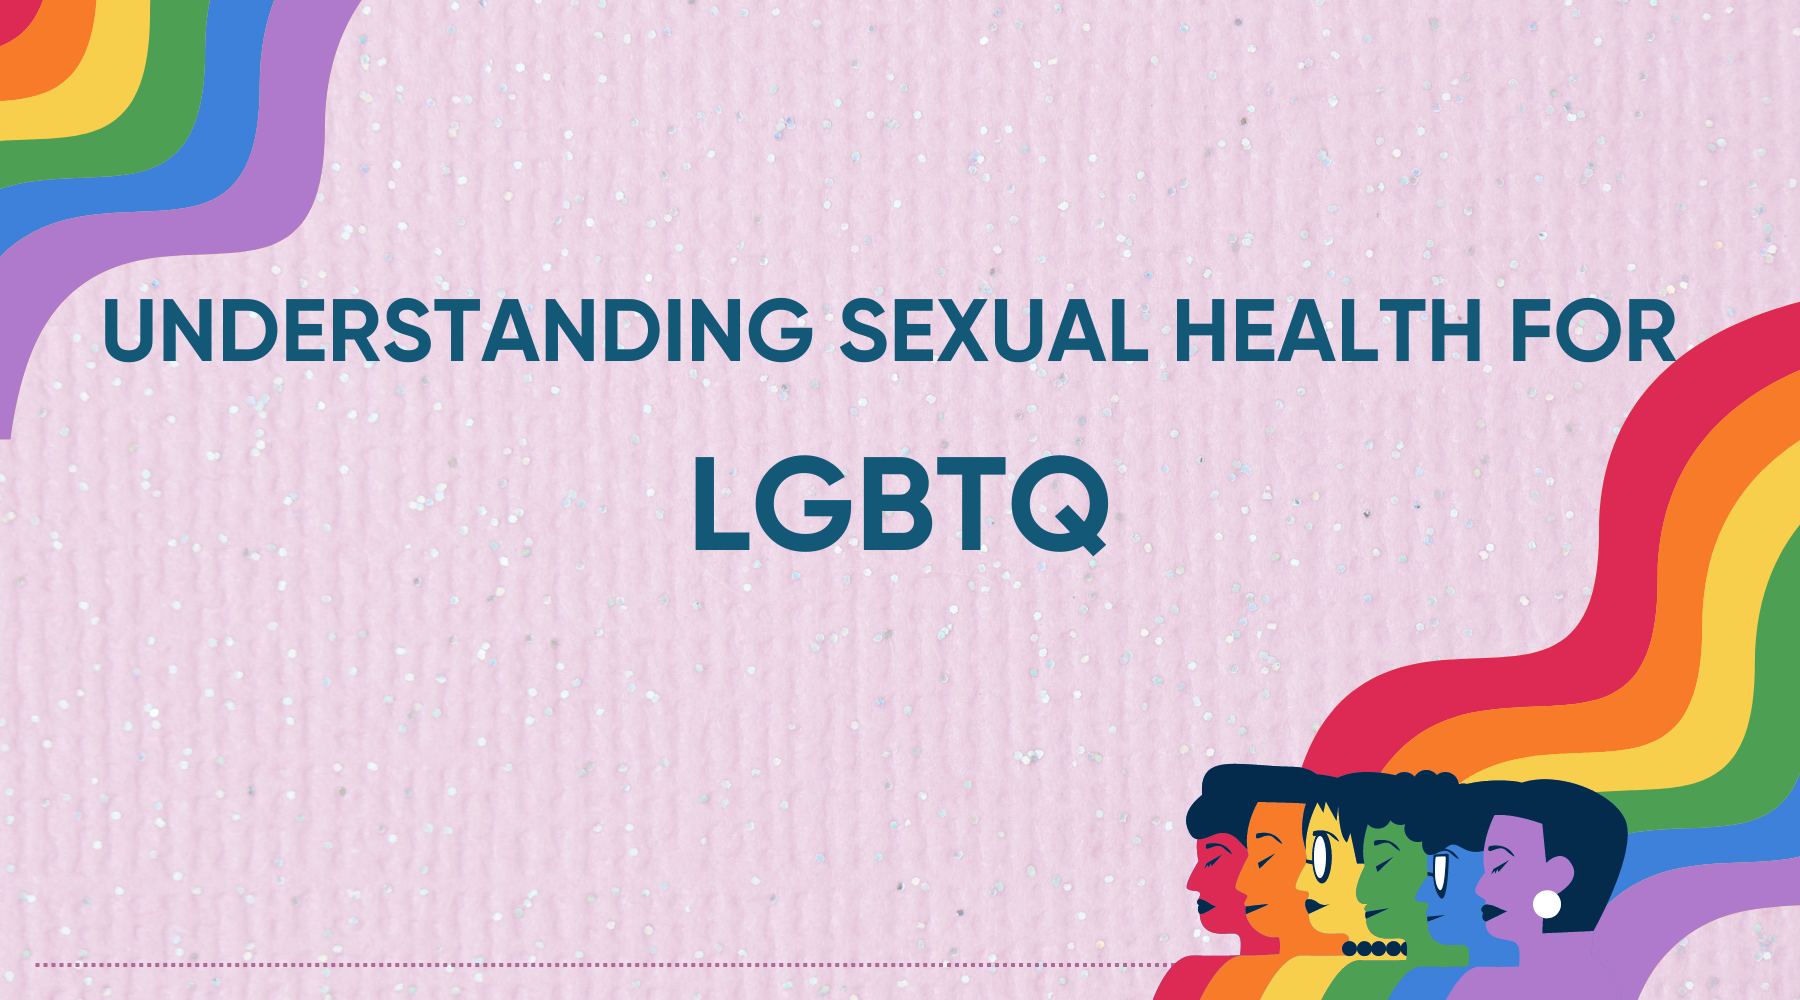 UNDERSTANDING SEXUAL HEALTH FOR LGBTQ